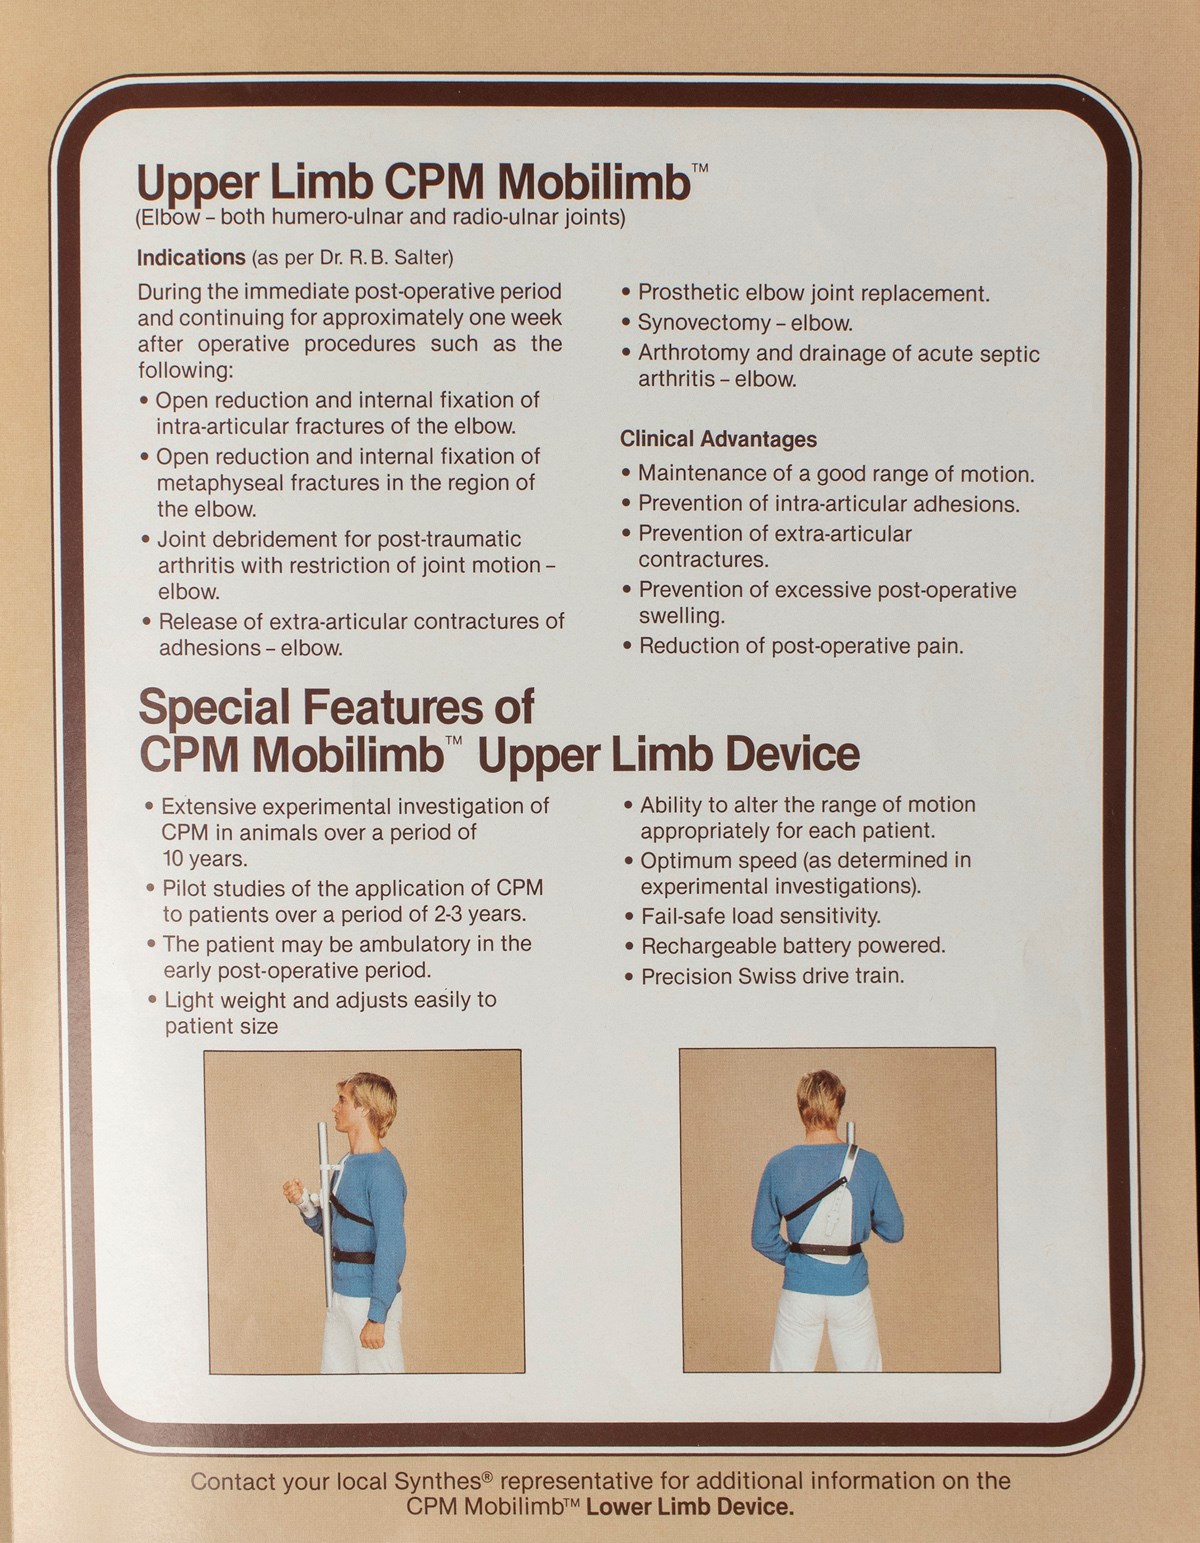 A poster that details the use cases, clinical advantages and special features of the Upper Limb CPM Mobilimb device. At the bottom of the poster is a side and back view of a man wearing the orthotic device. 